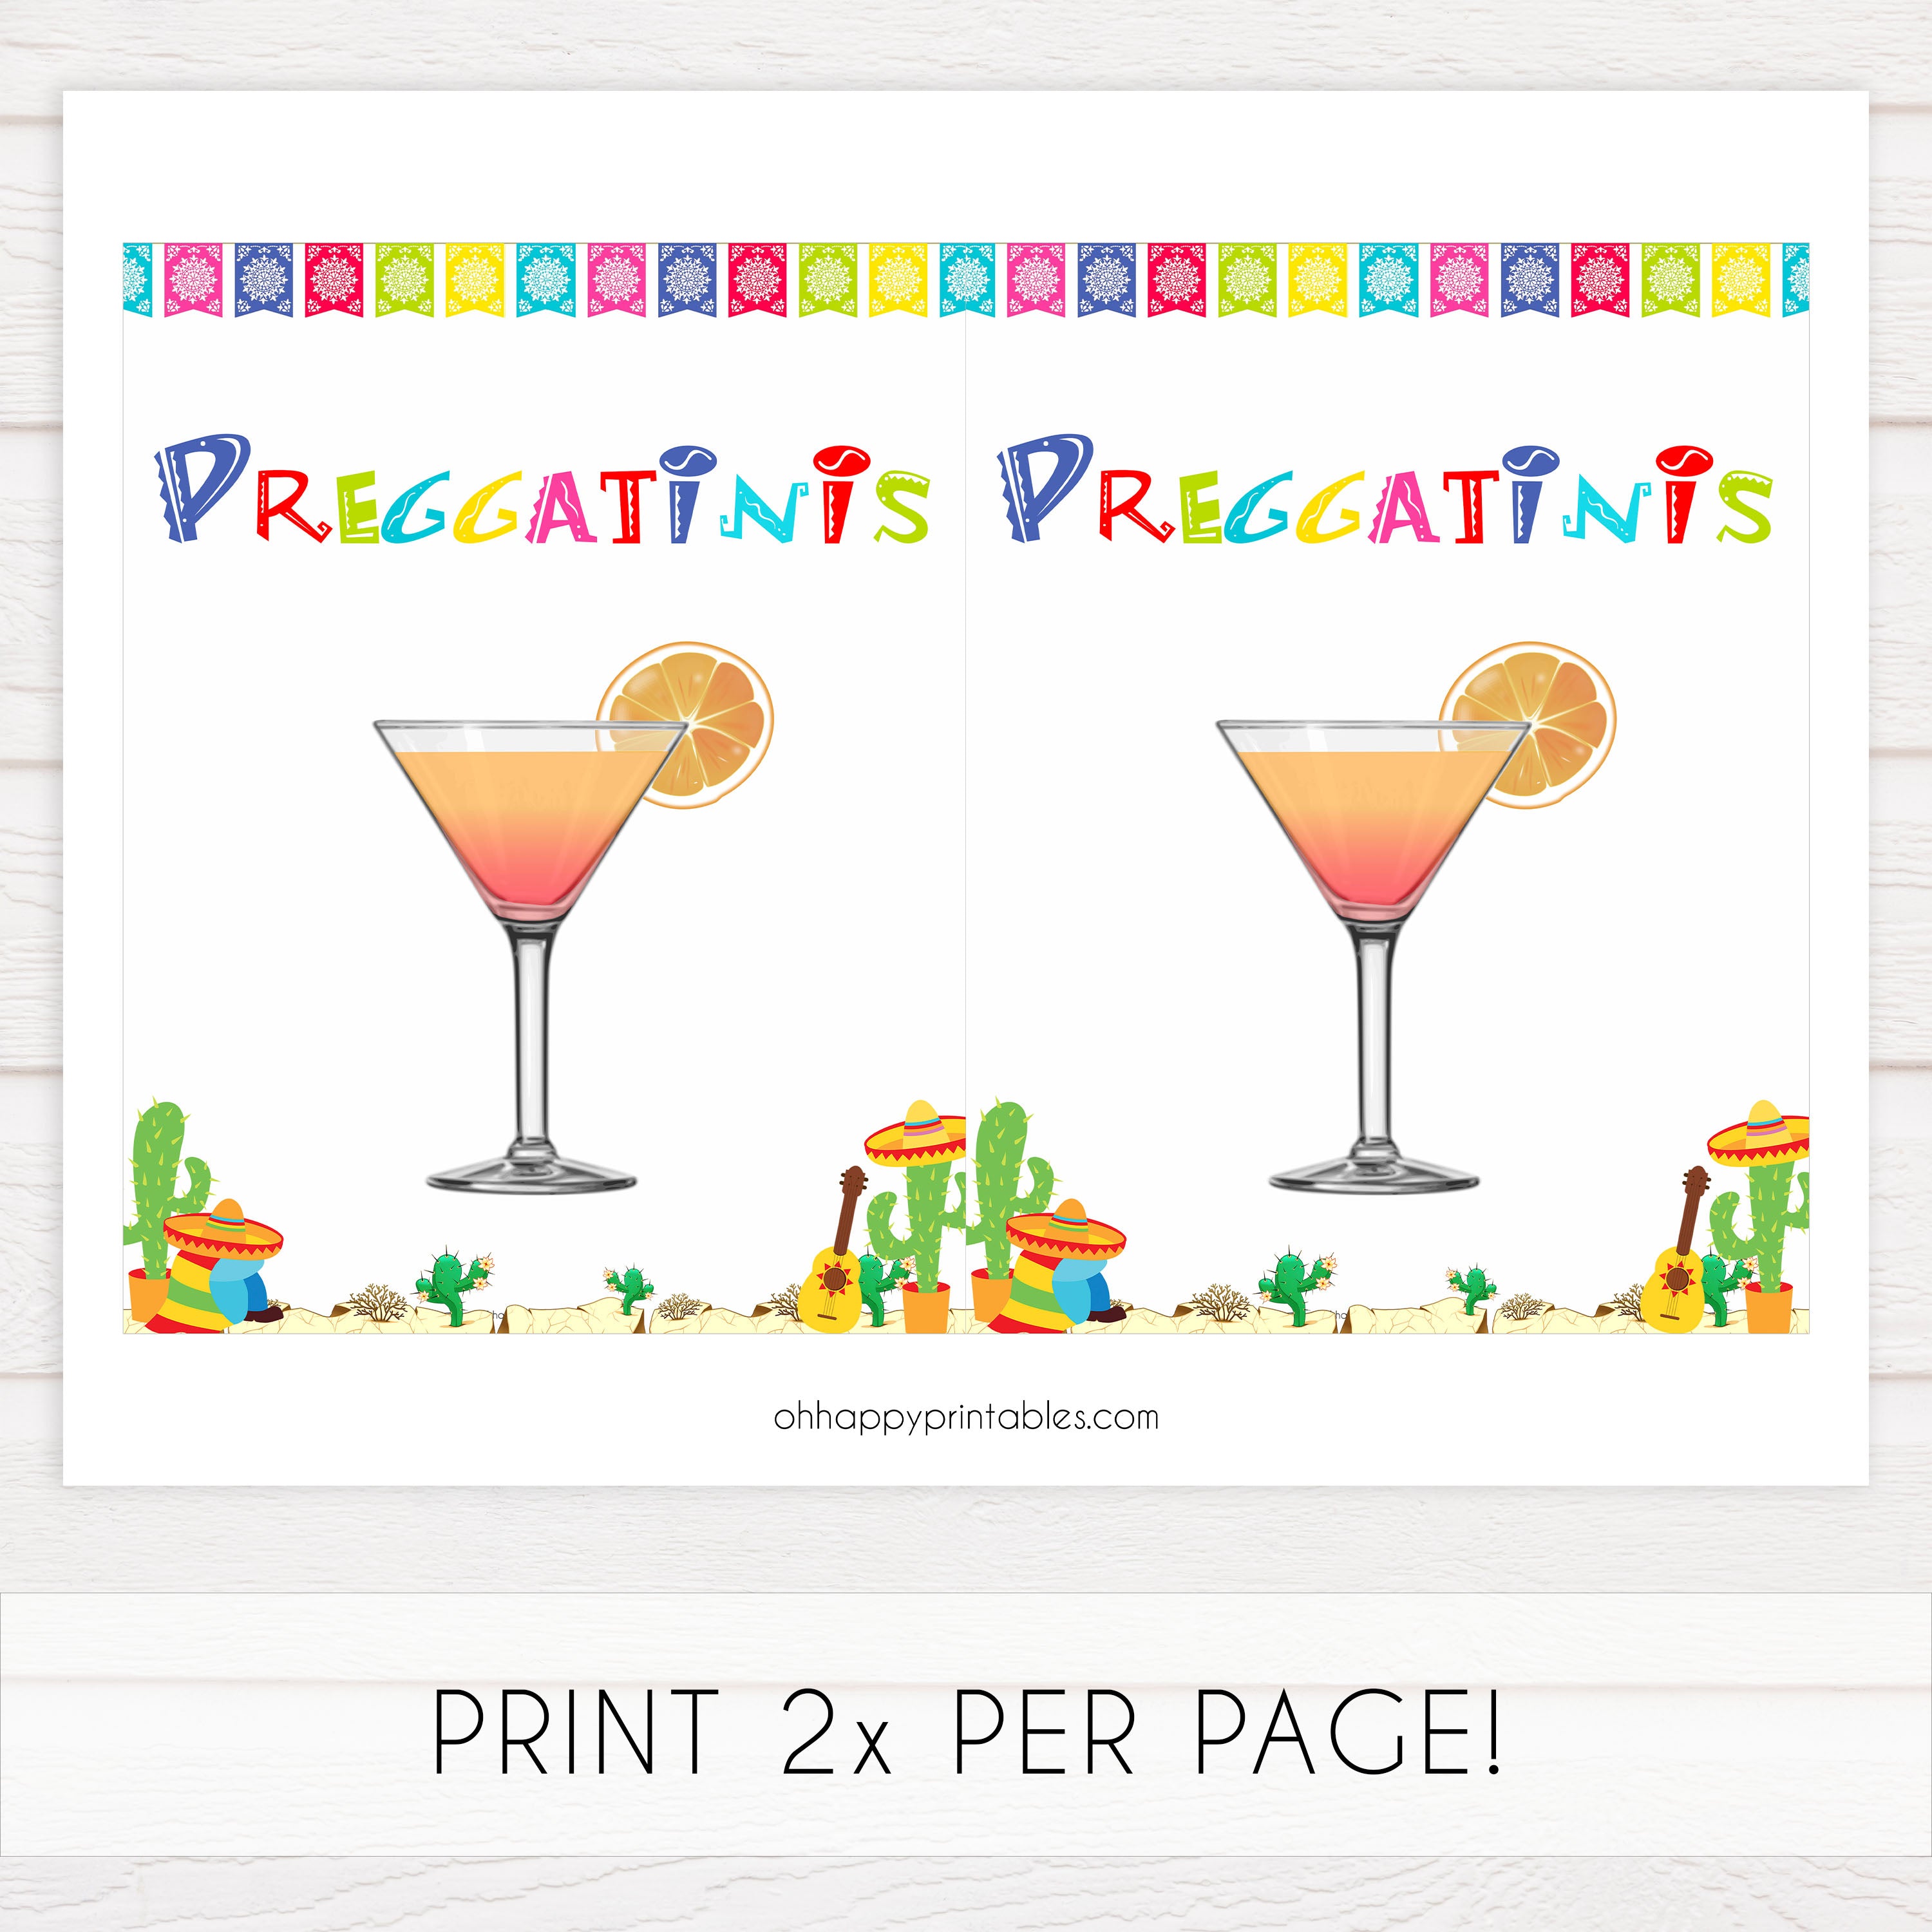 preggatinis baby table signs, Mexican fiesta baby decor, printable baby table signs, printable baby decor, baby Mexican fiesta table signs, fun baby signs, baby fiesta fun baby table signs